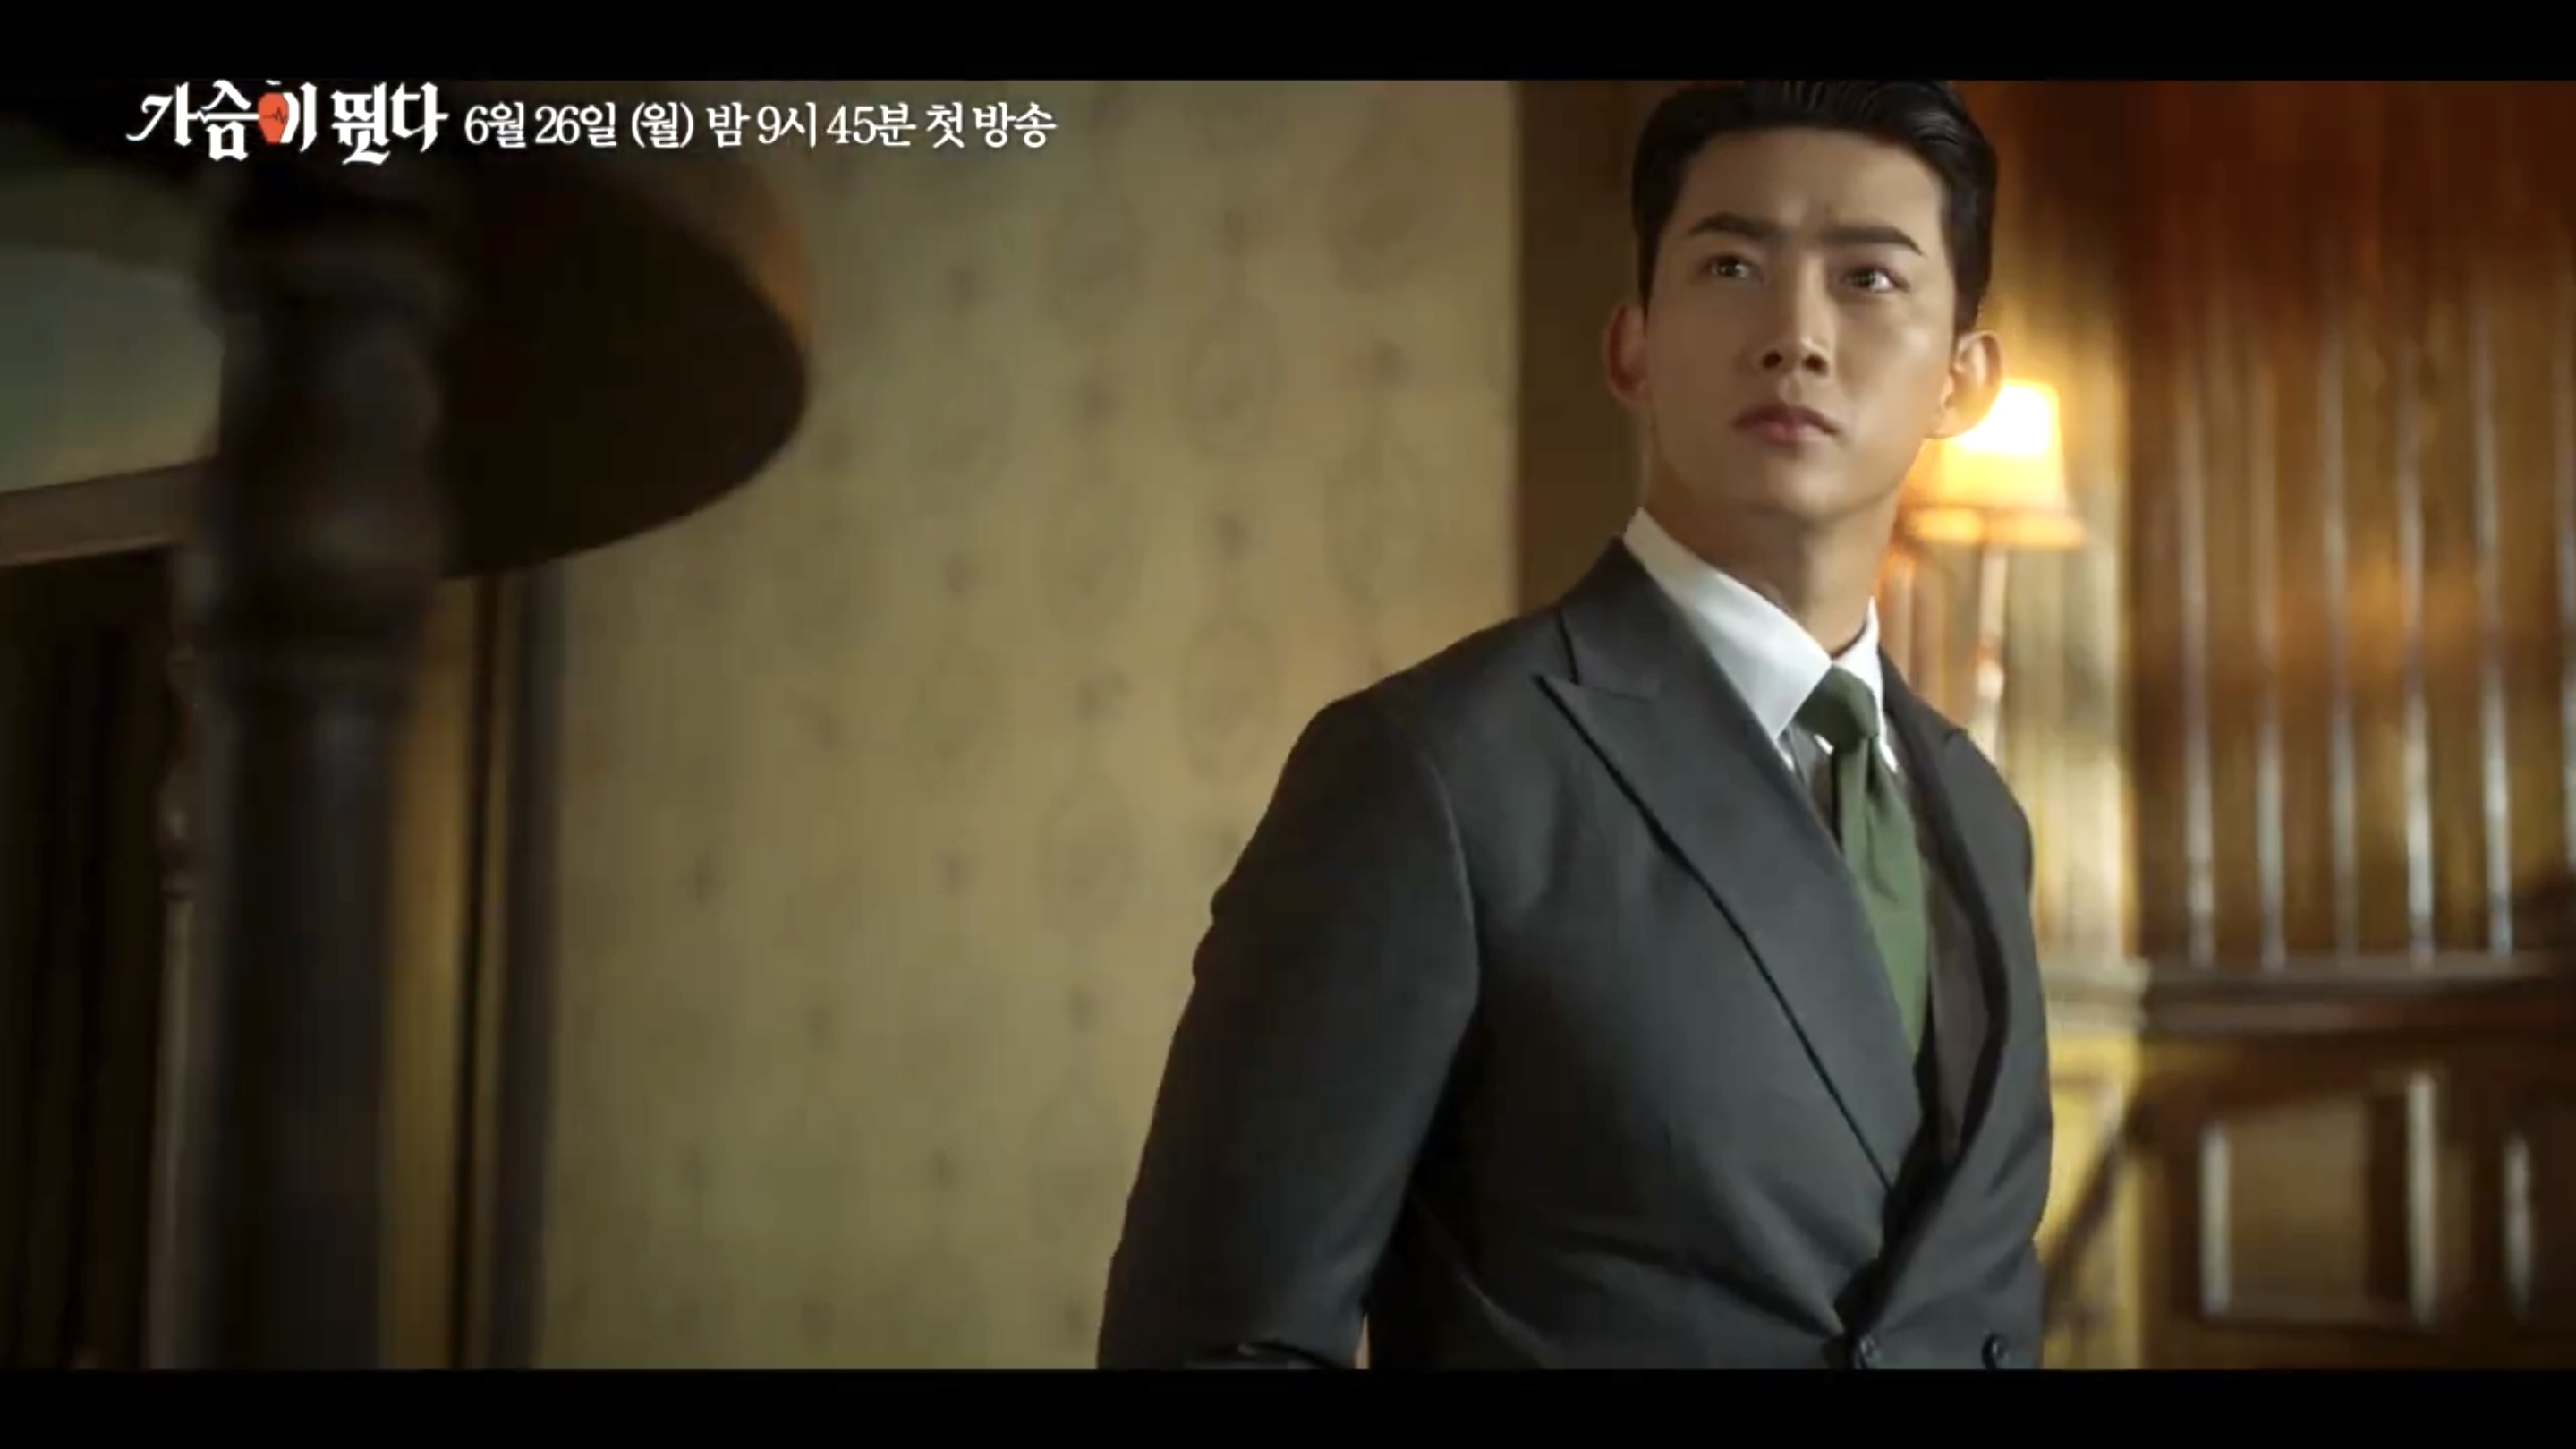 Taecyeon is a peculiar housemate in Heartbeat